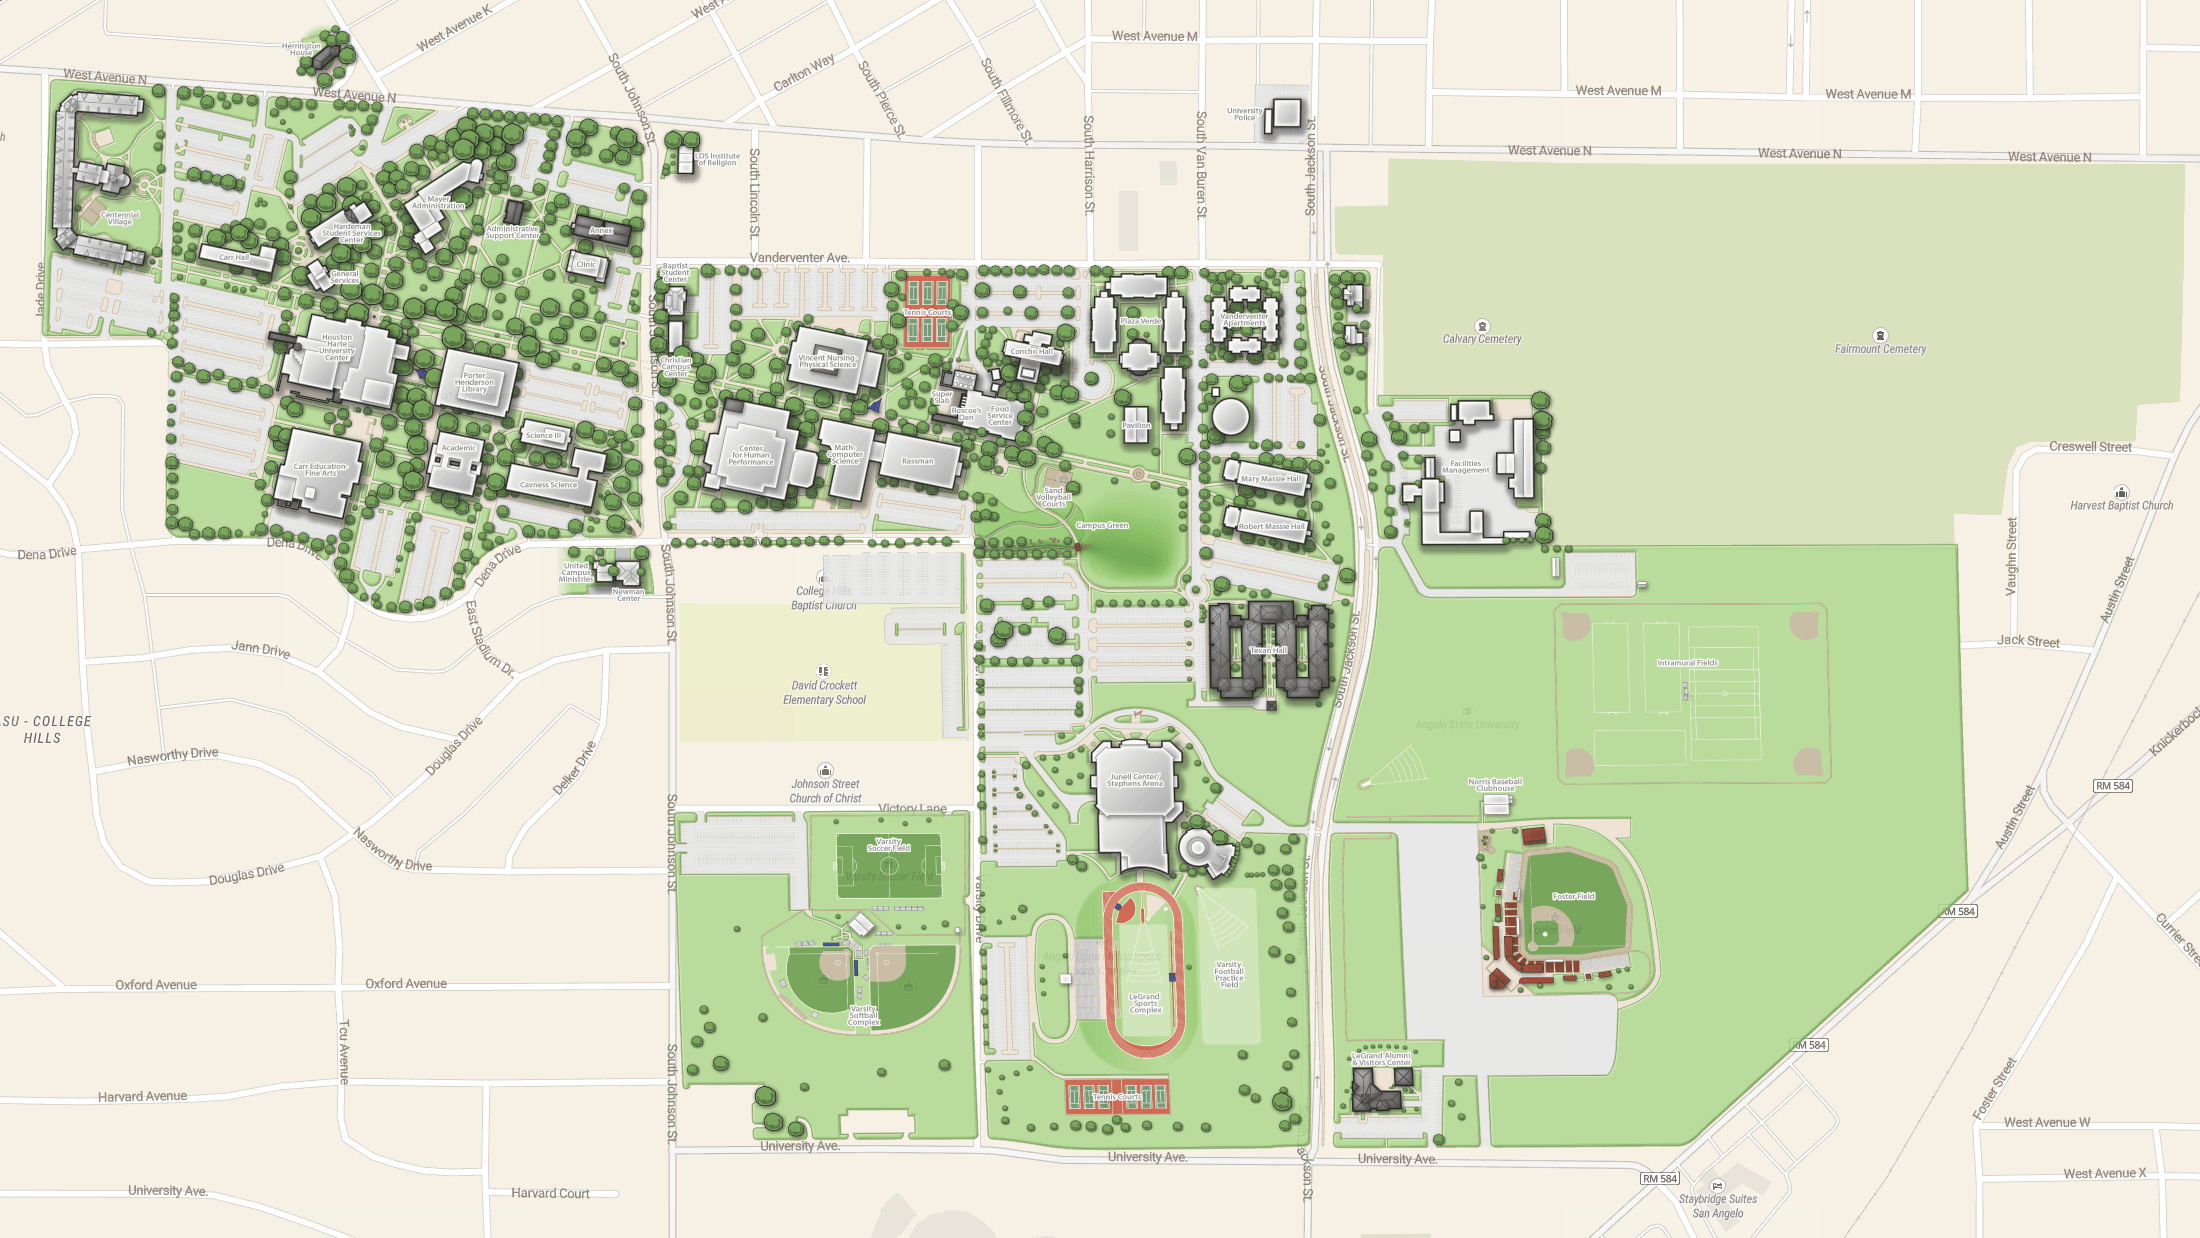 Custom made campus plan on the Street map as a background